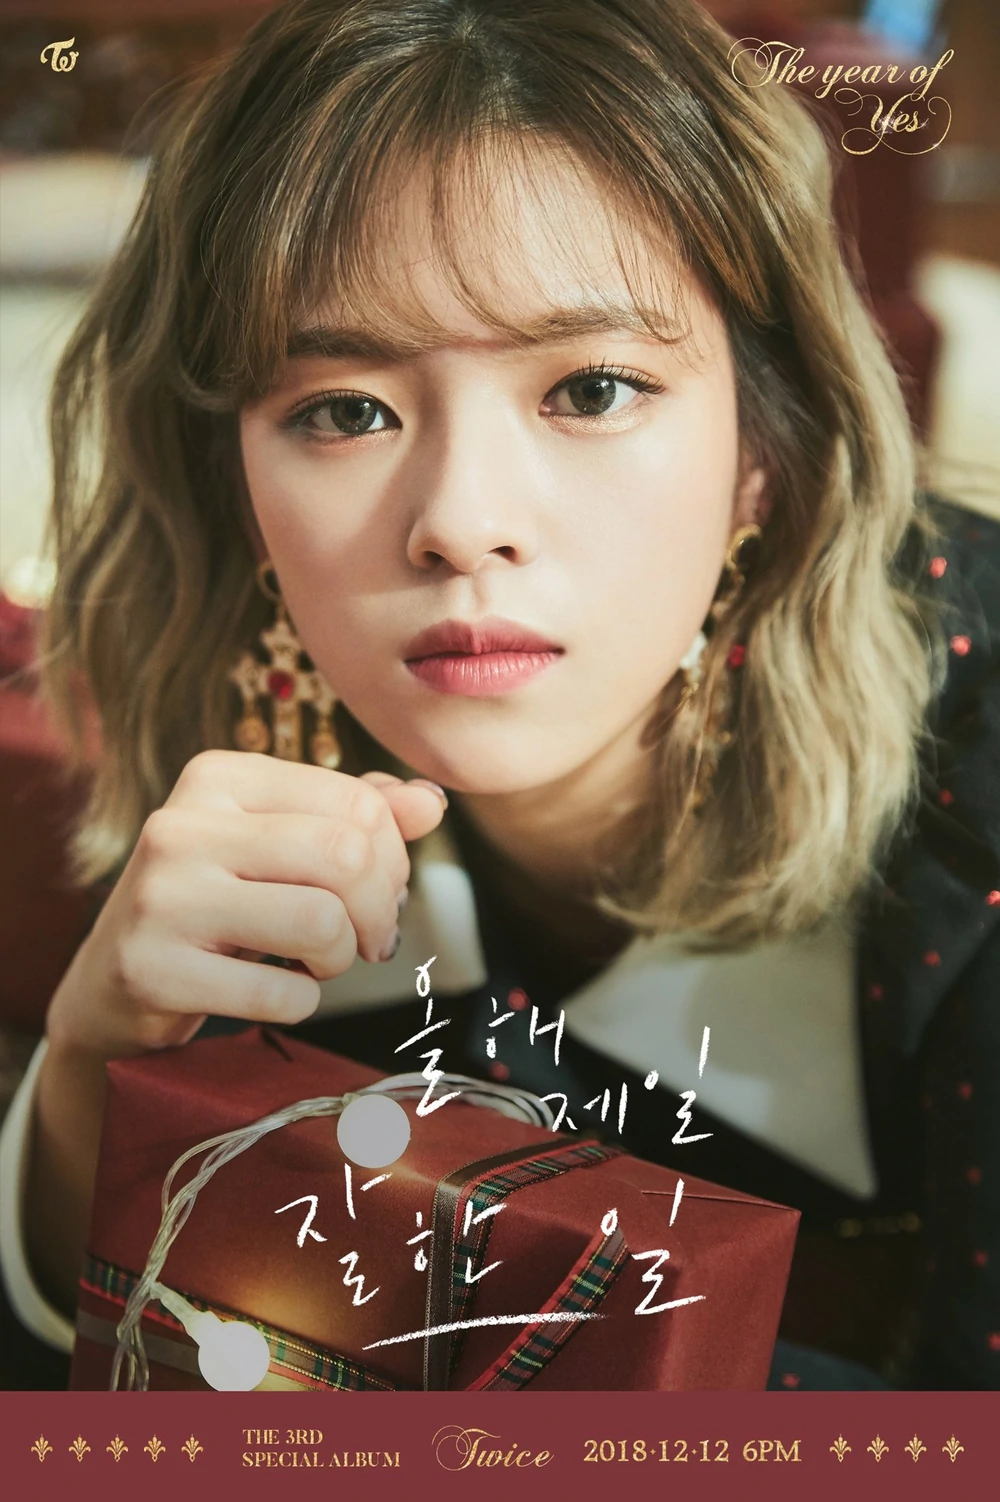 Twice Year Of Yes Jeongyeon Concept Teaser Picture Image Photo Kpop K-Concept 2